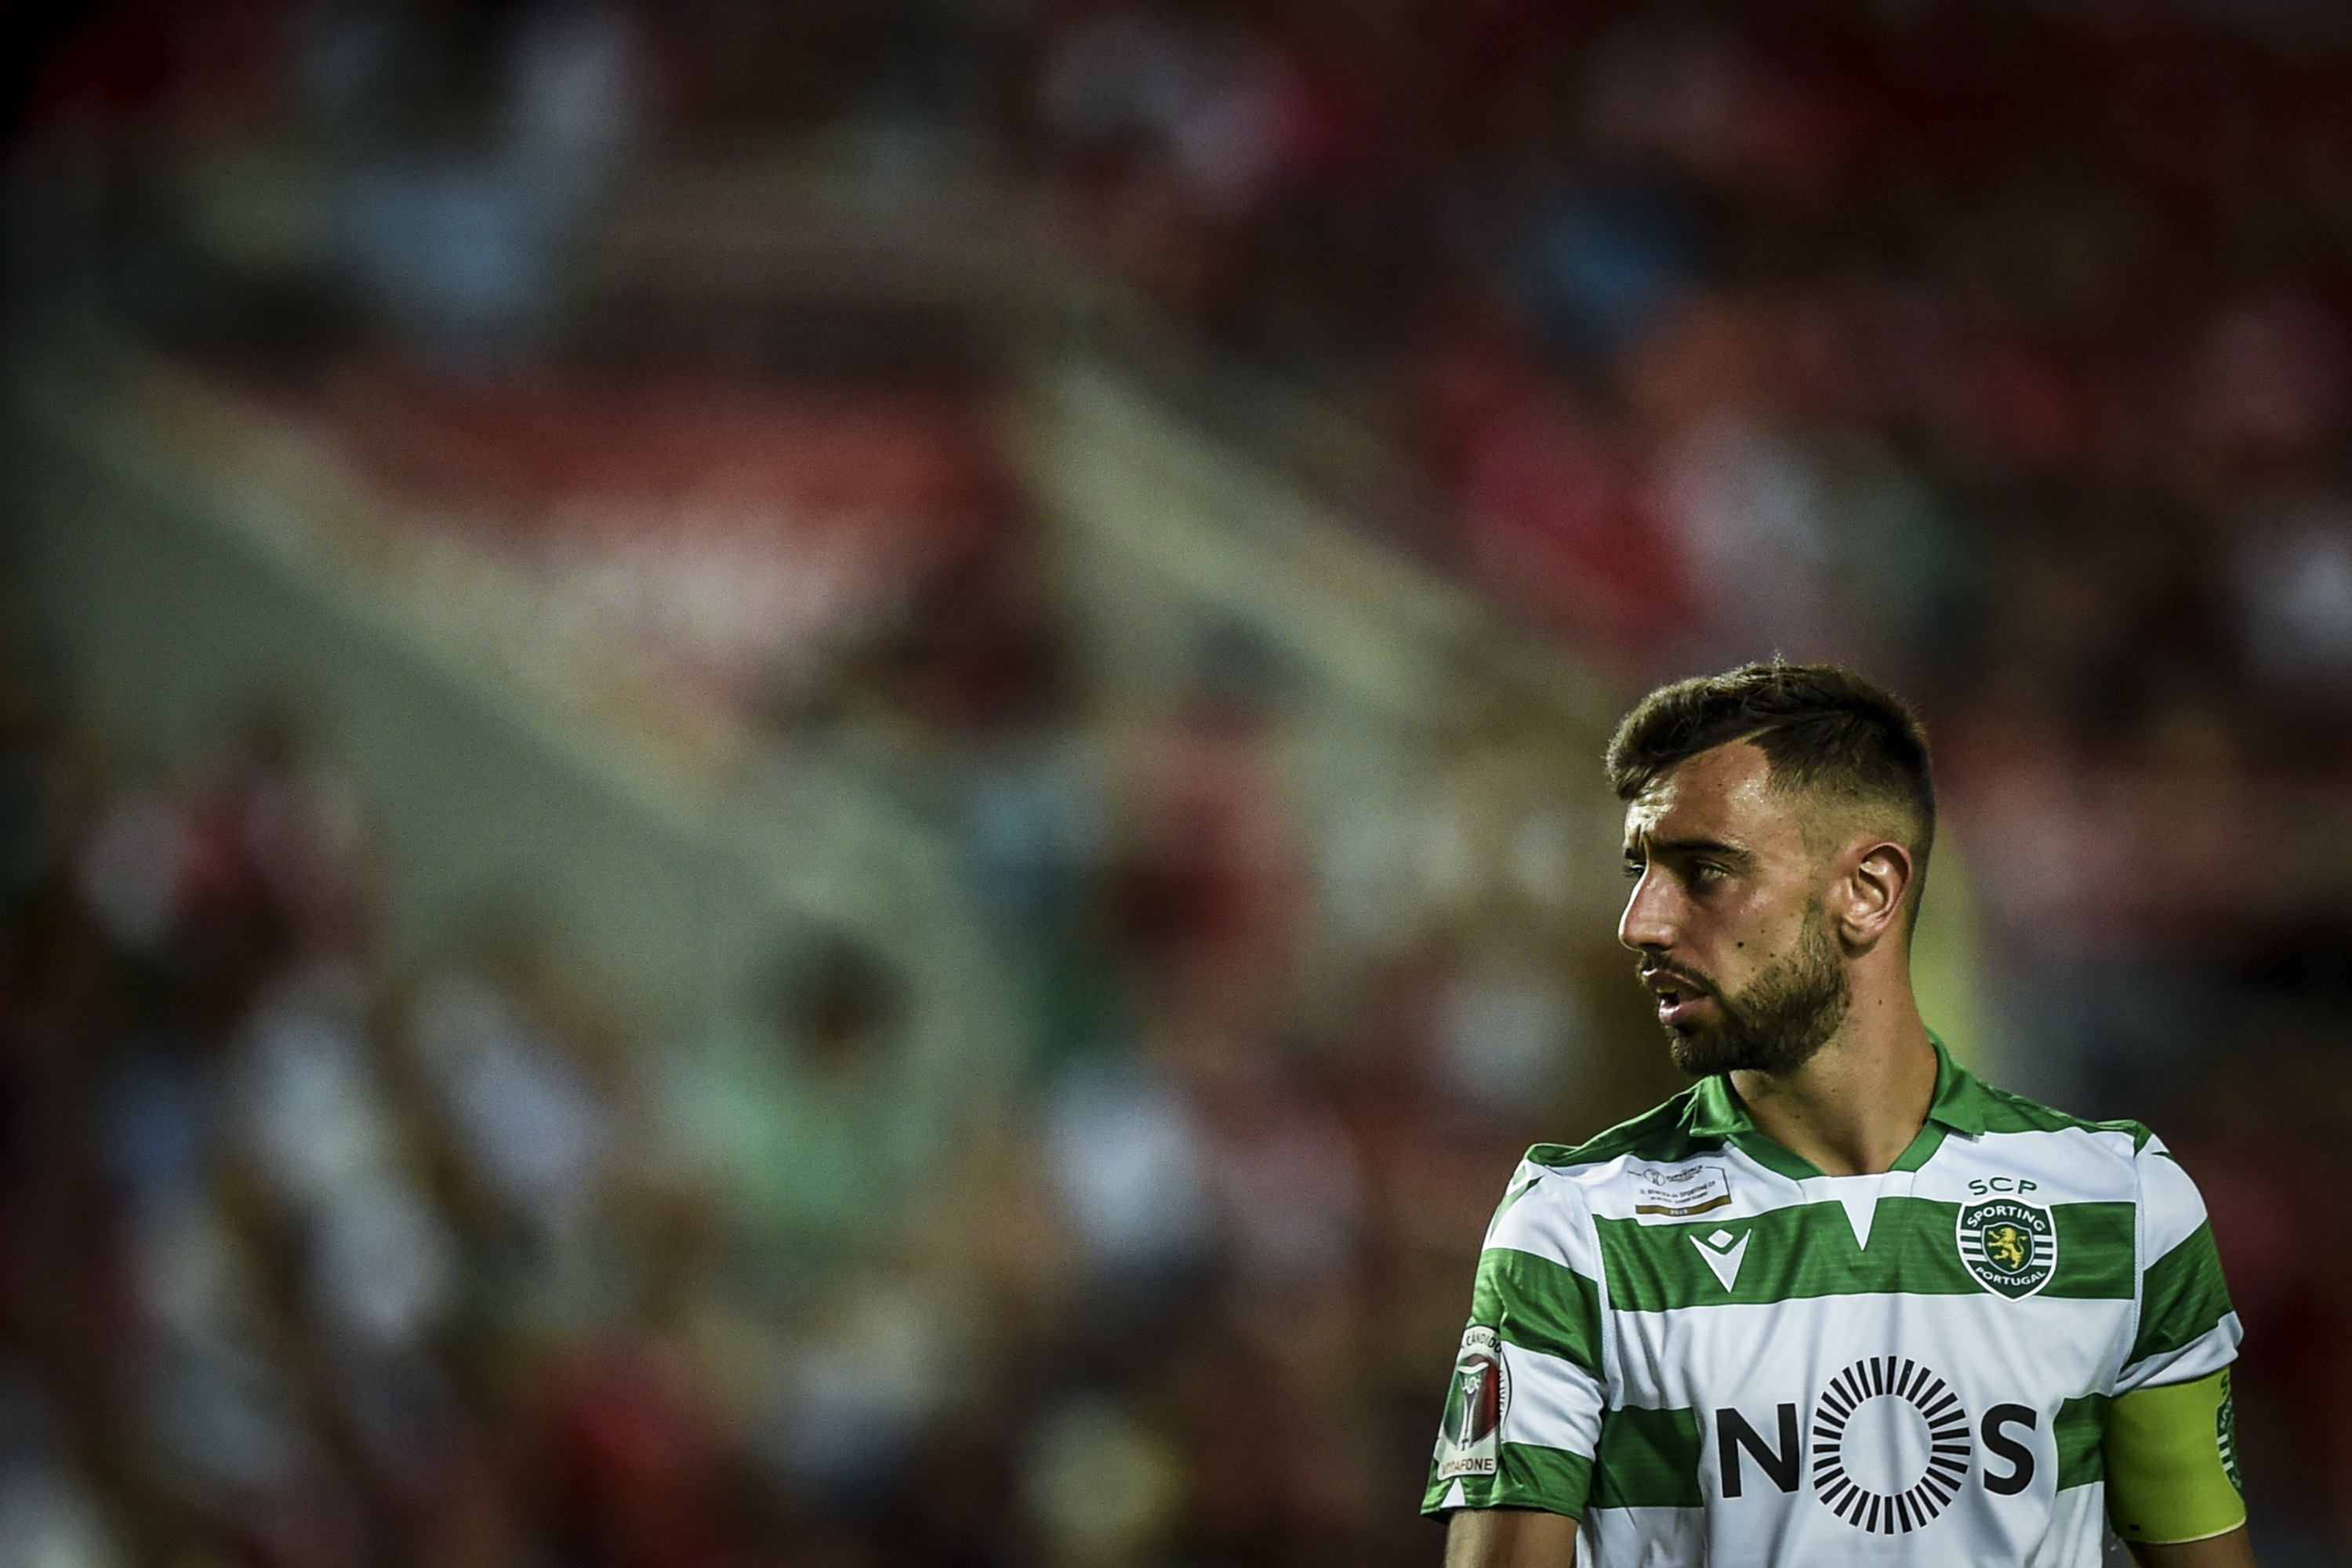 Sporting's Portuguese midfielder Bruno Fernandes looks on during the Portugal's Candido de Oliveira Super Cup final football match between SL Benfica and Sporting CP at the Algarve stadium in Faro on August 4, 2019. (Photo by PATRICIA DE MELO MOREIRA / AFP)        (Photo credit should read PATRICIA DE MELO MOREIRA/AFP/Getty Images)